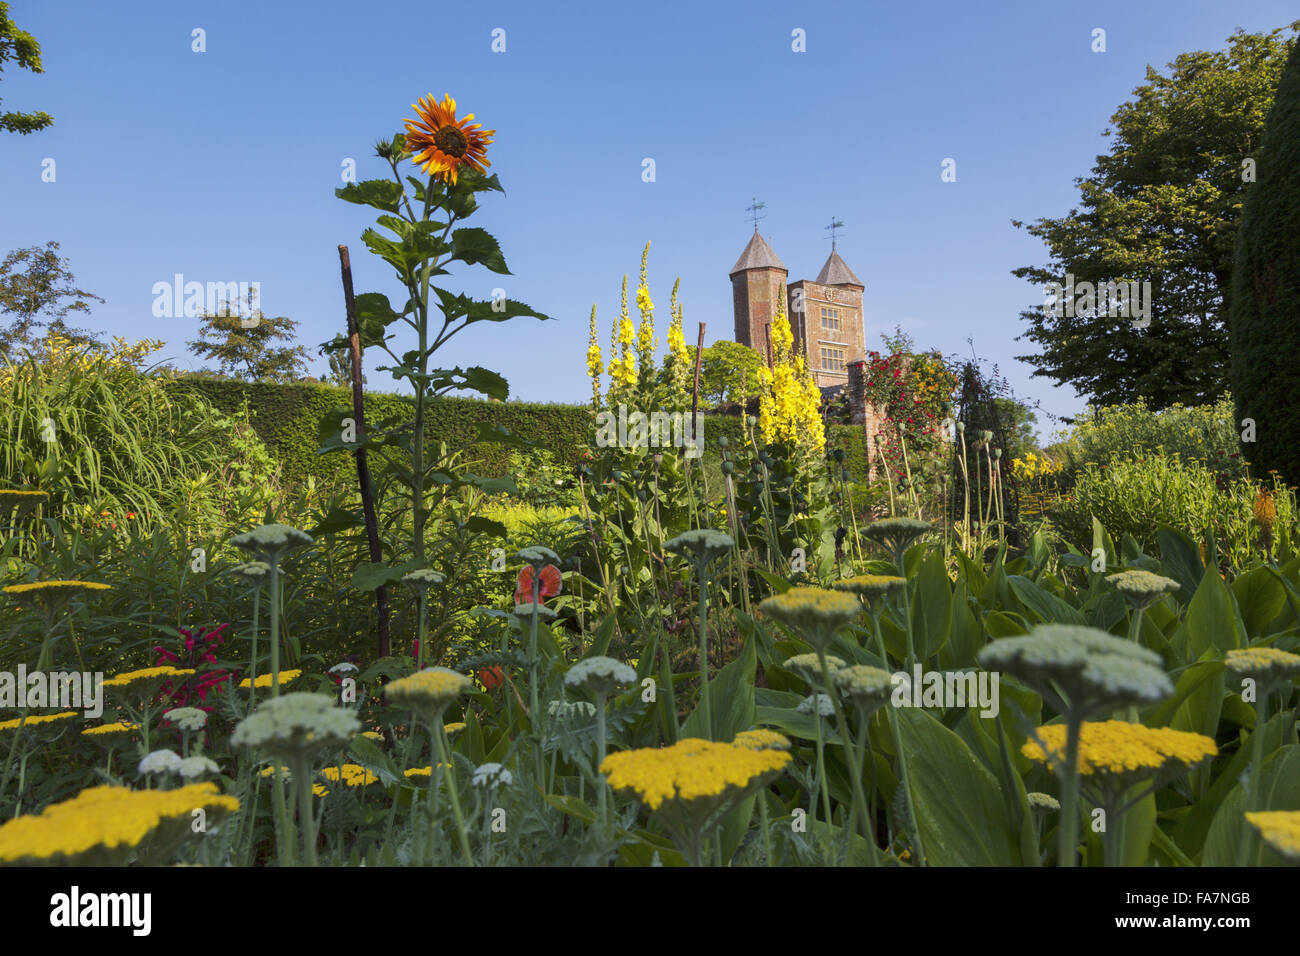 The Tower seen from the gardens in July at Sissinghurst Castle, Kent. Sissinghurst gained international fame in the 1930s when Vita Sackville-West and Harold Nicolson created a garden there. Stock Photo